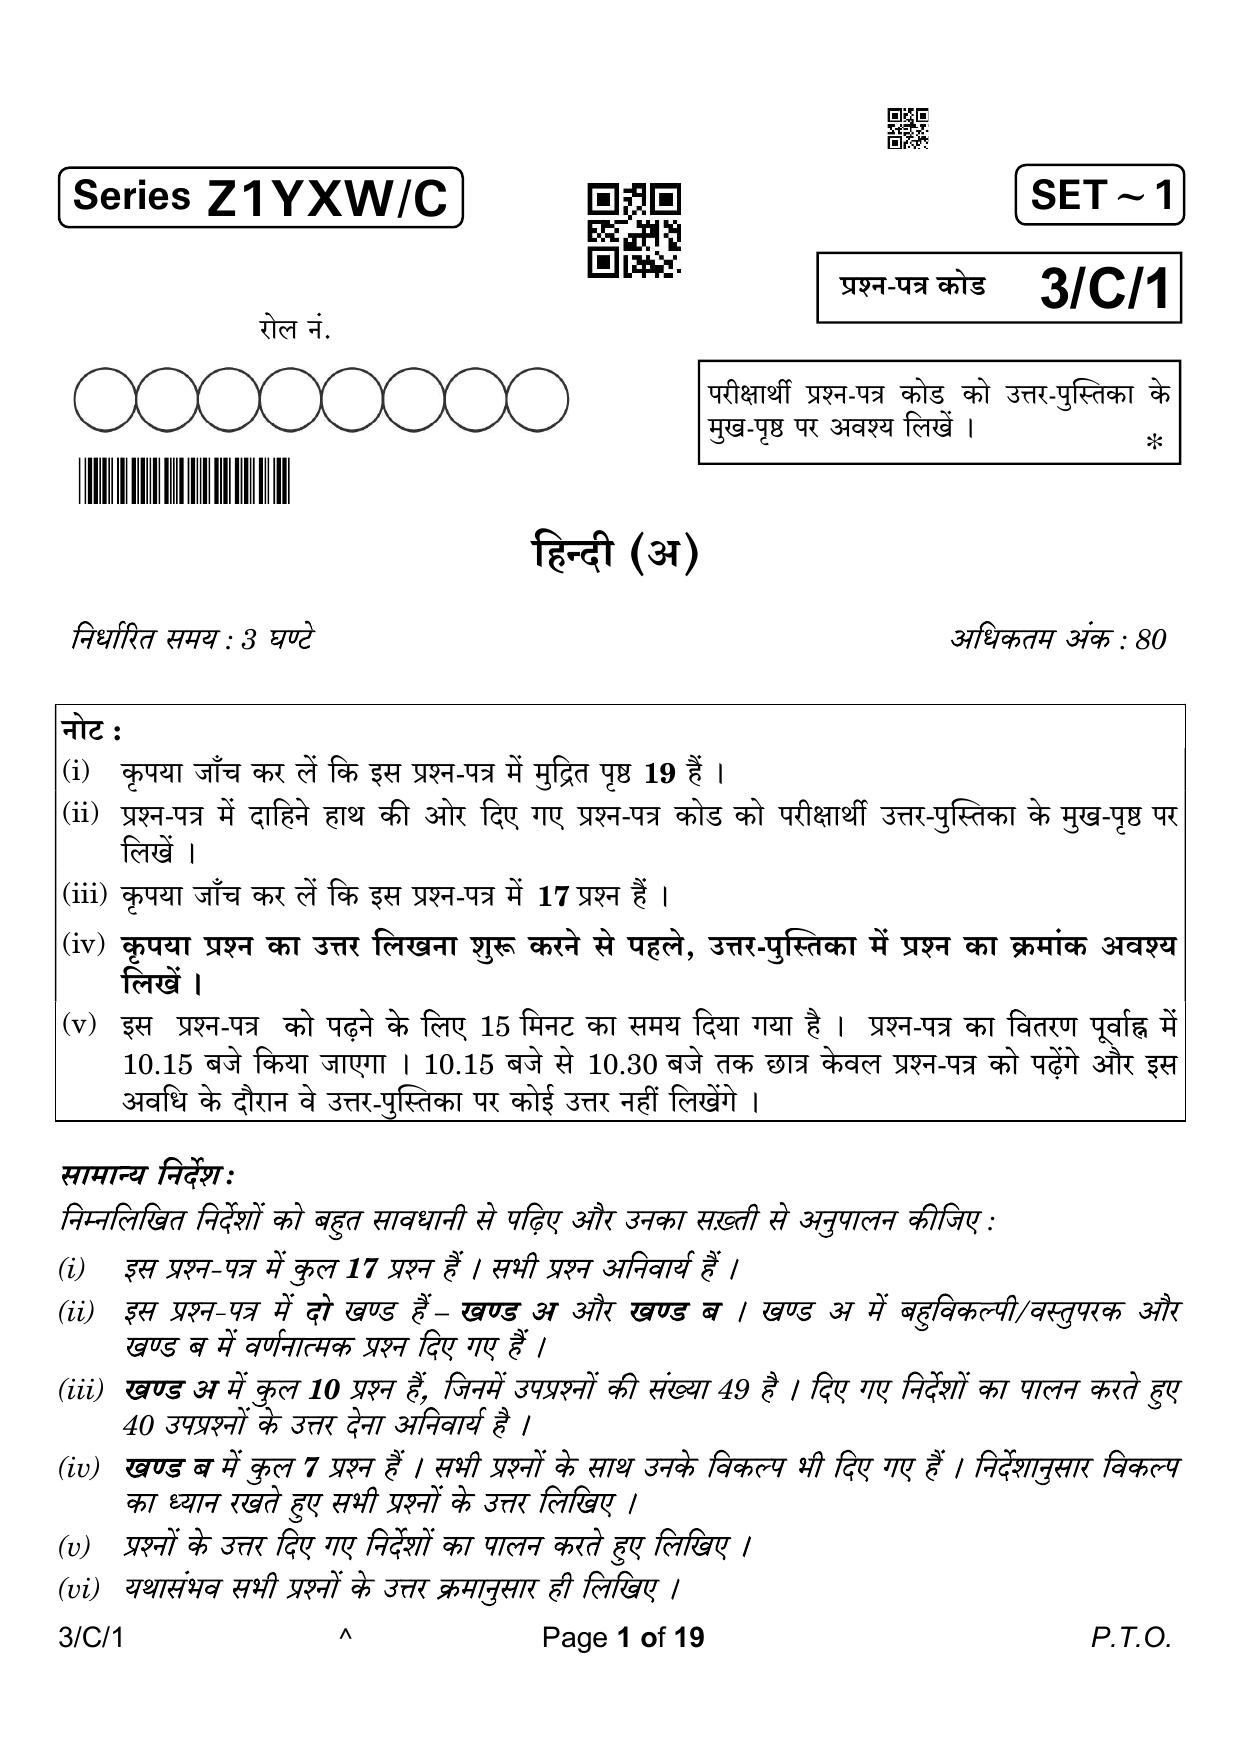 CBSE Class 10 3-1 Hindi A 2023 (Compartment) Question Paper - Page 1